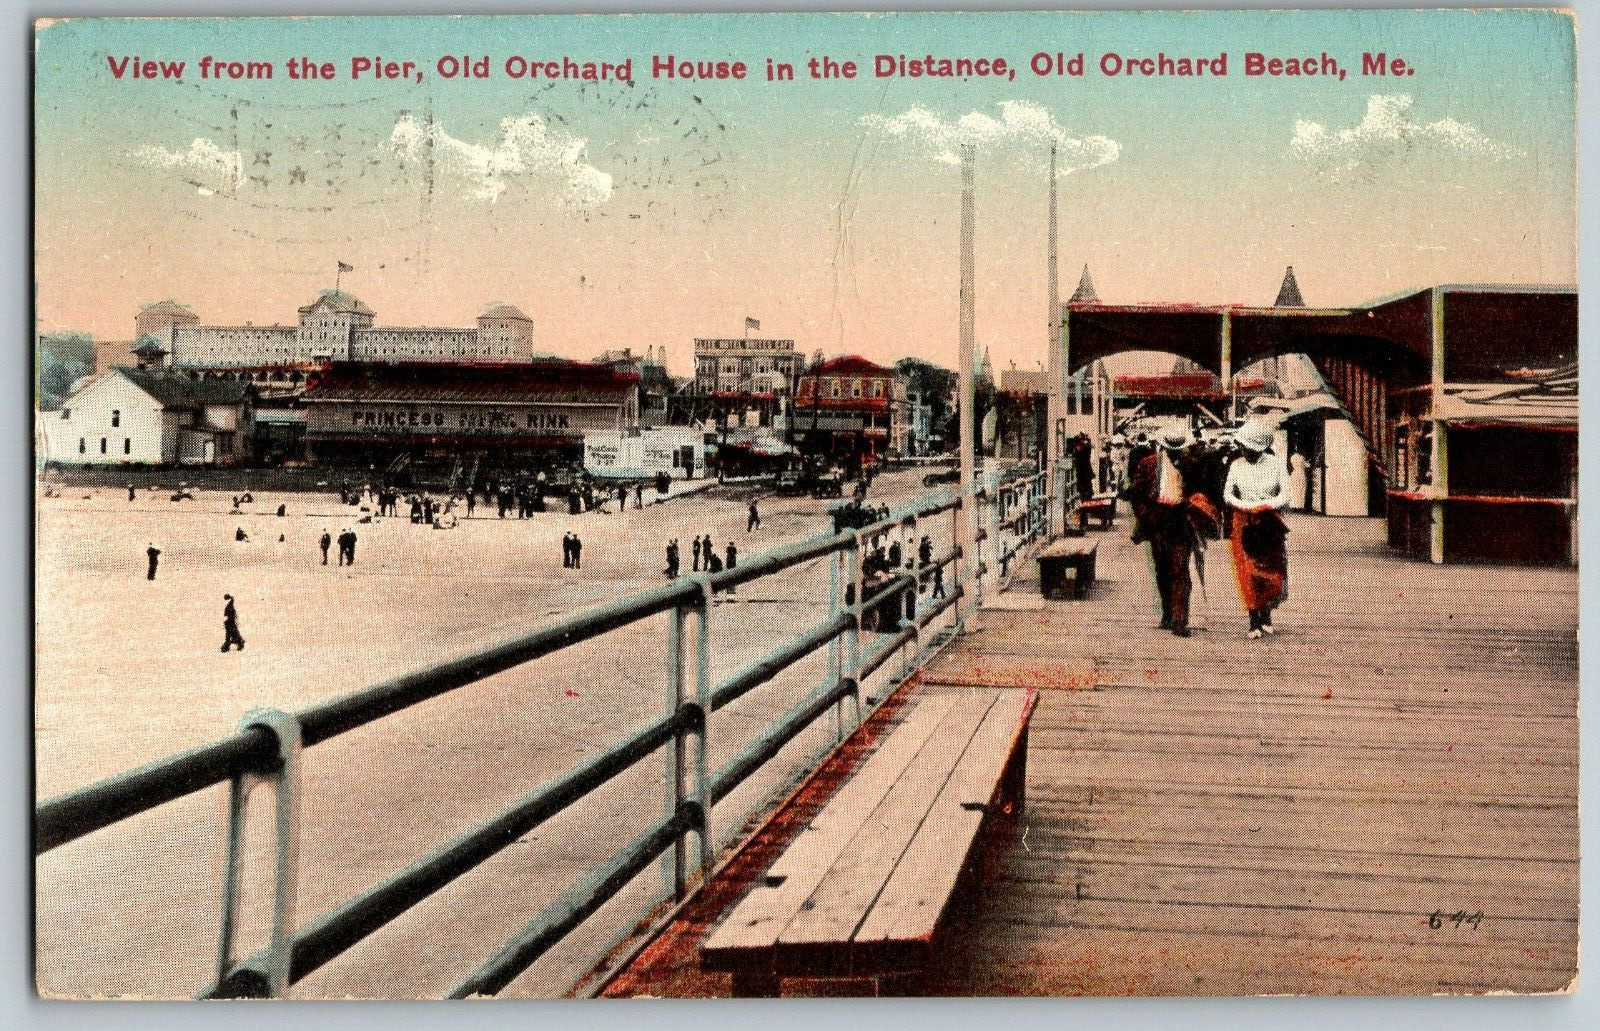 Old Orchard Beach, Maine - Pier, Old Orchard House - Vintage Postcard - Posted